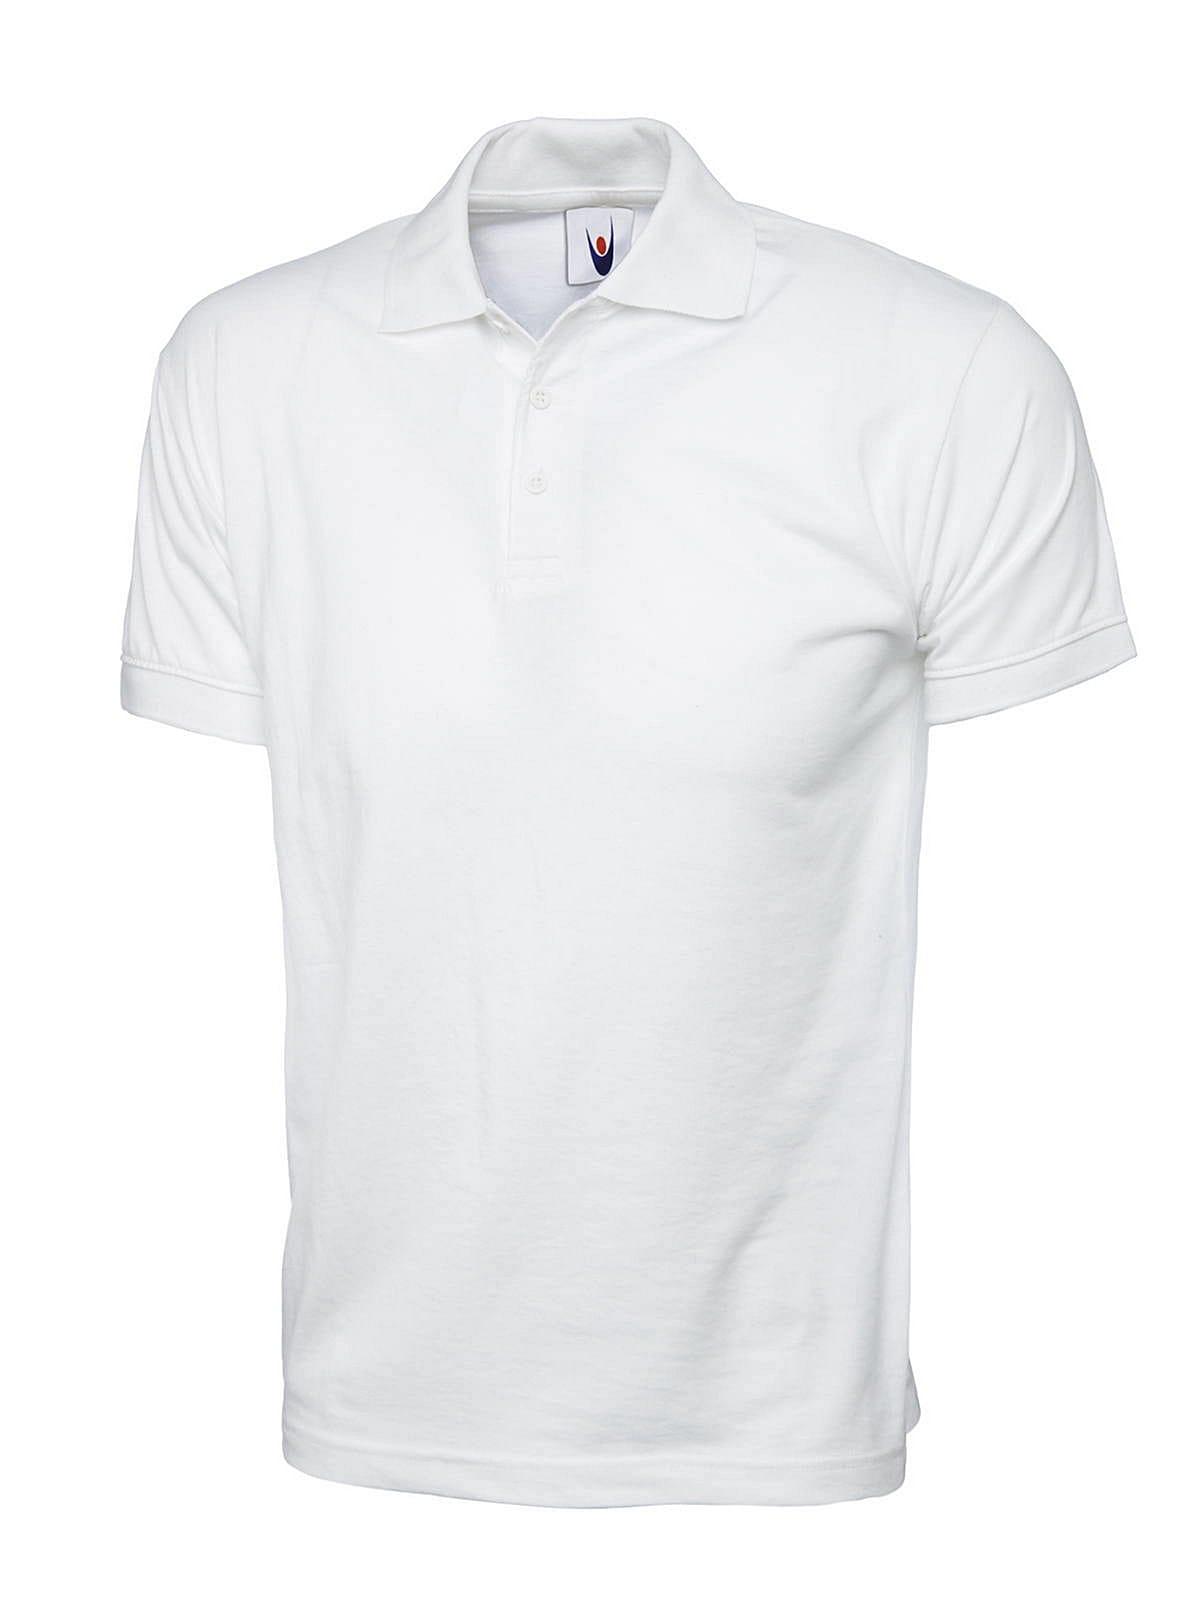 Uneek 200GSM Jersey Polo Shirt in White (Product Code: UC122)